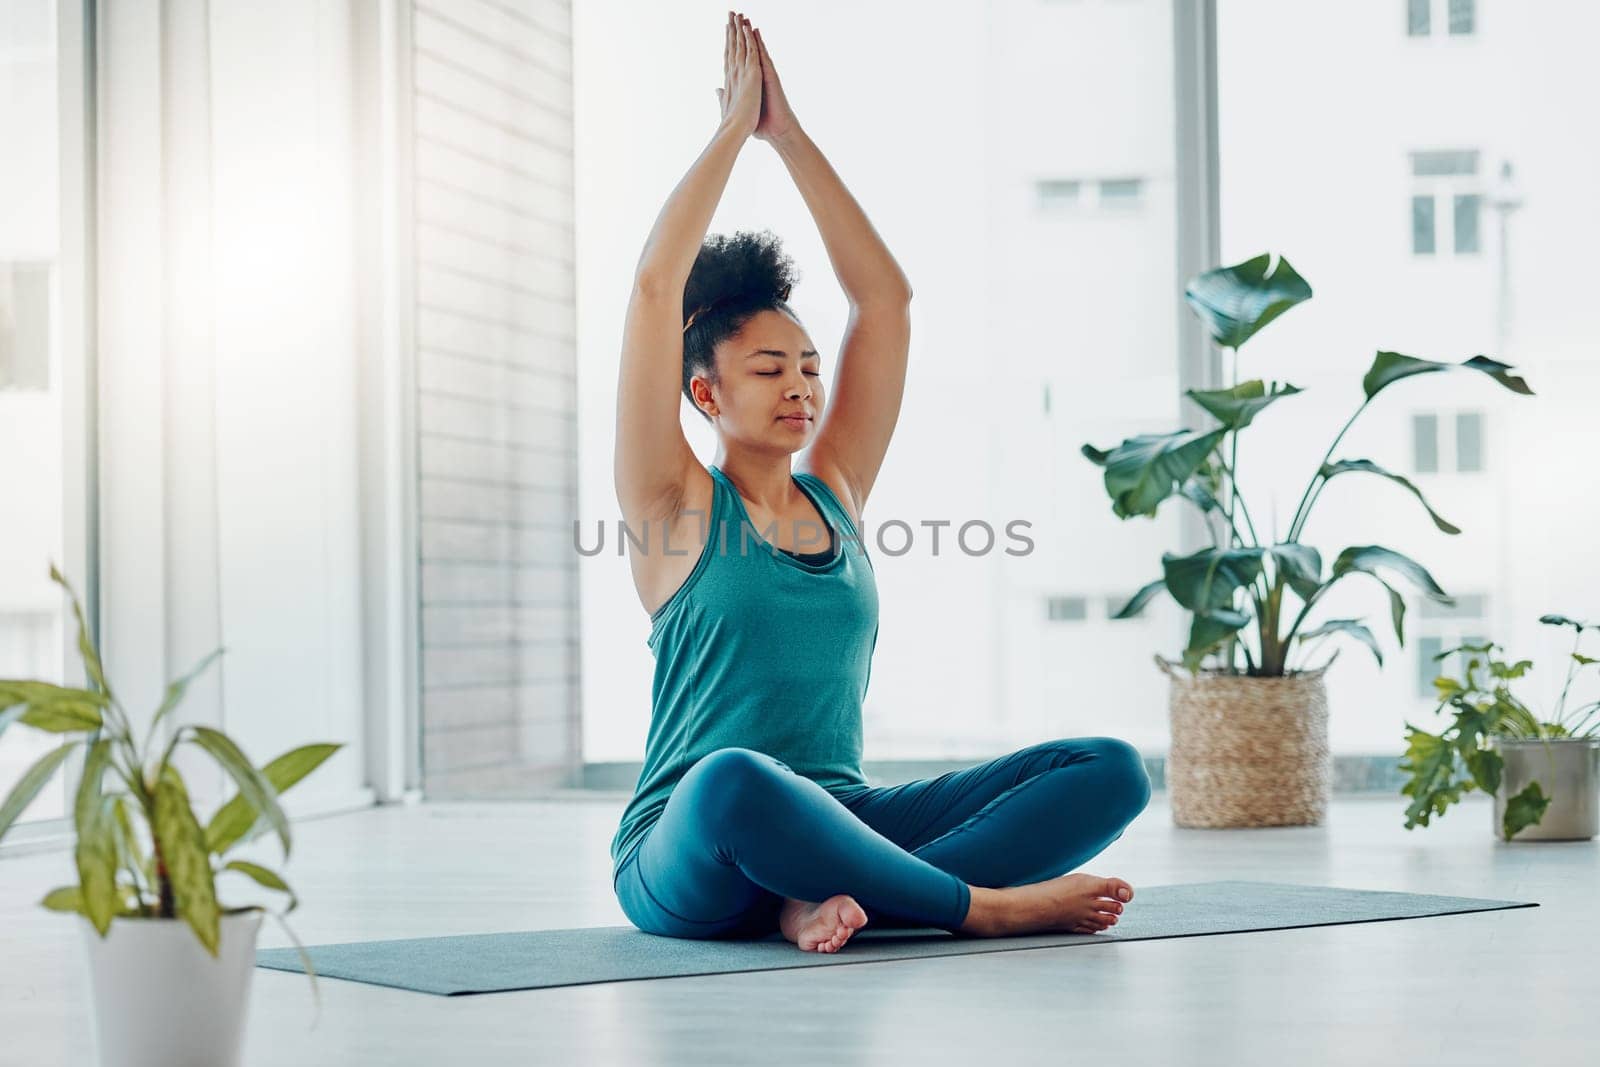 Yoga, meditation exercise and black woman prayer hands for fitness, peace and wellness. Young person in health studio for holistic workout, mental health and body balance with zen mind and energy by YuriArcurs